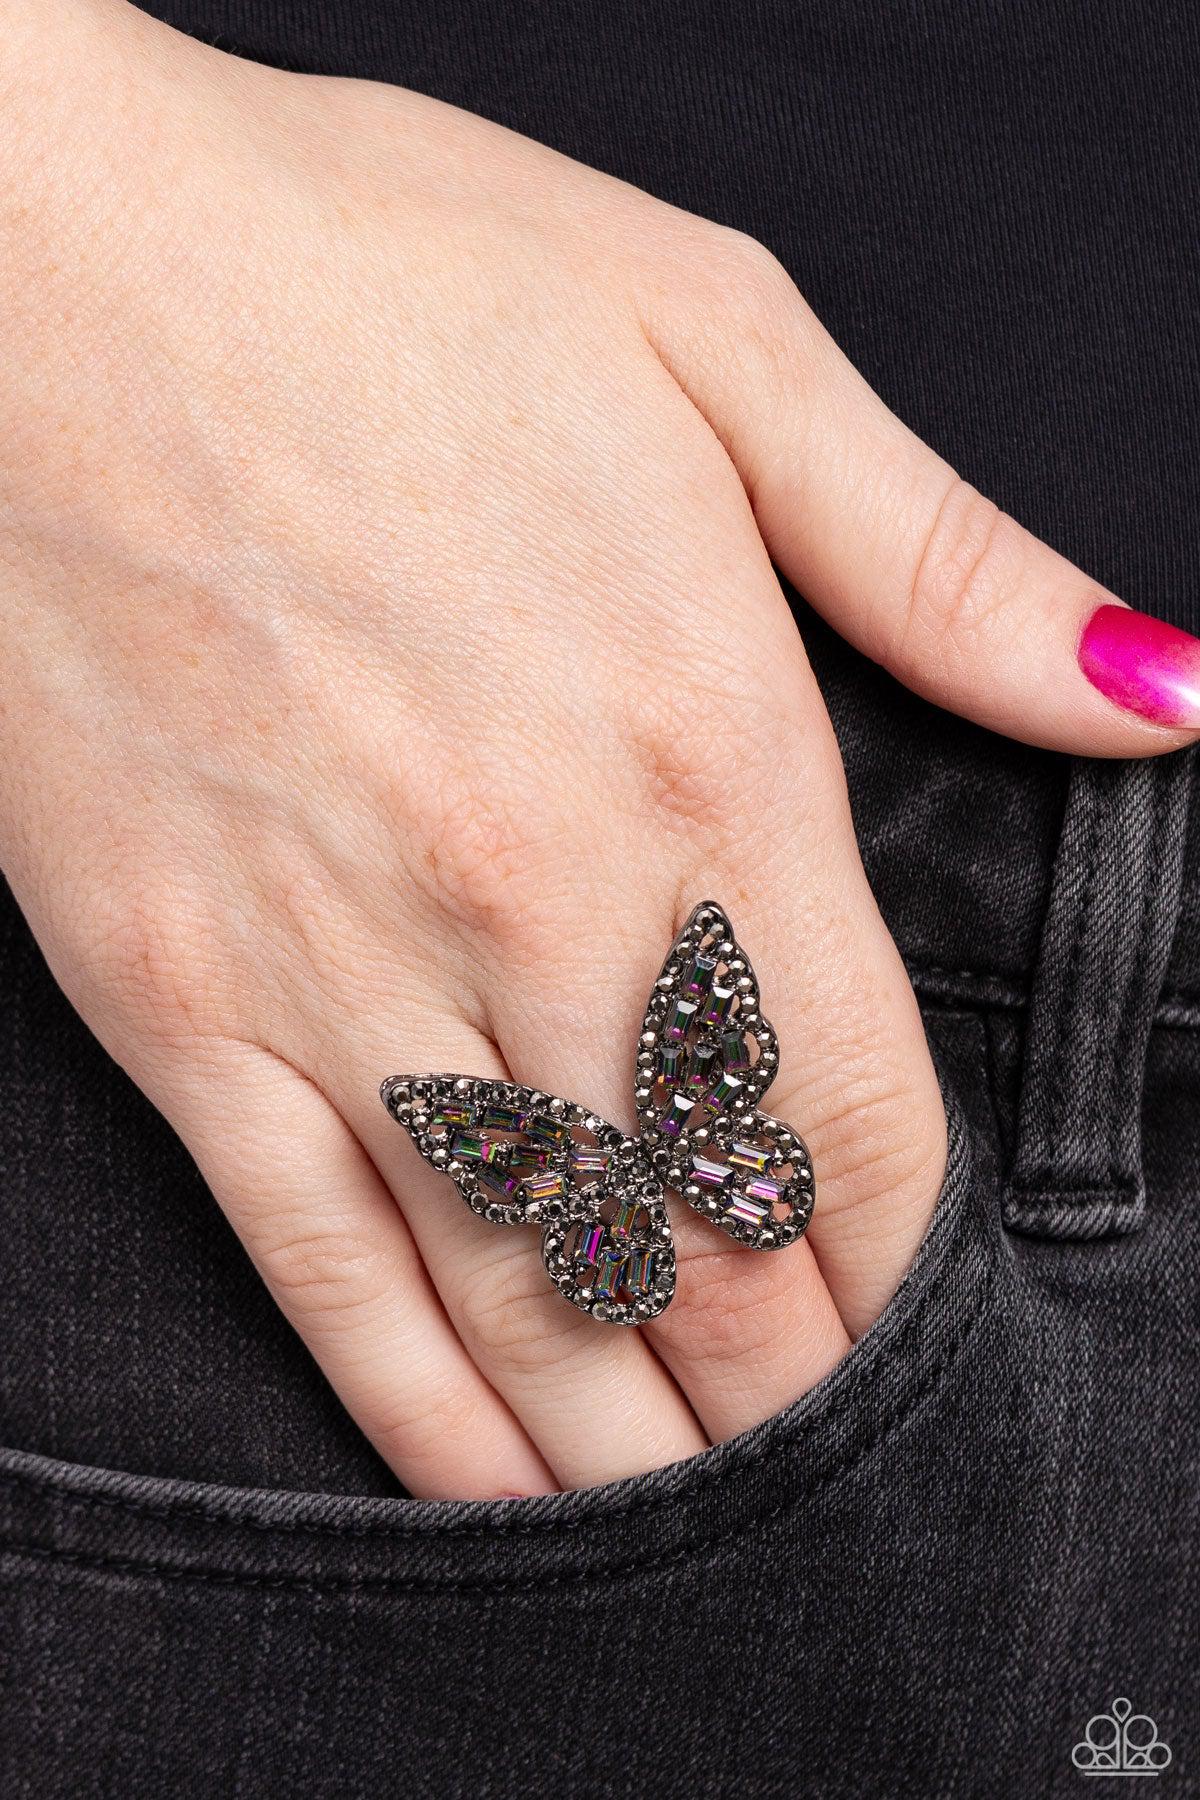 Flauntable Flutter Multi Oil Spill Butterfly Ring - Paparazzi Accessories- lightbox - CarasShop.com - $5 Jewelry by Cara Jewels